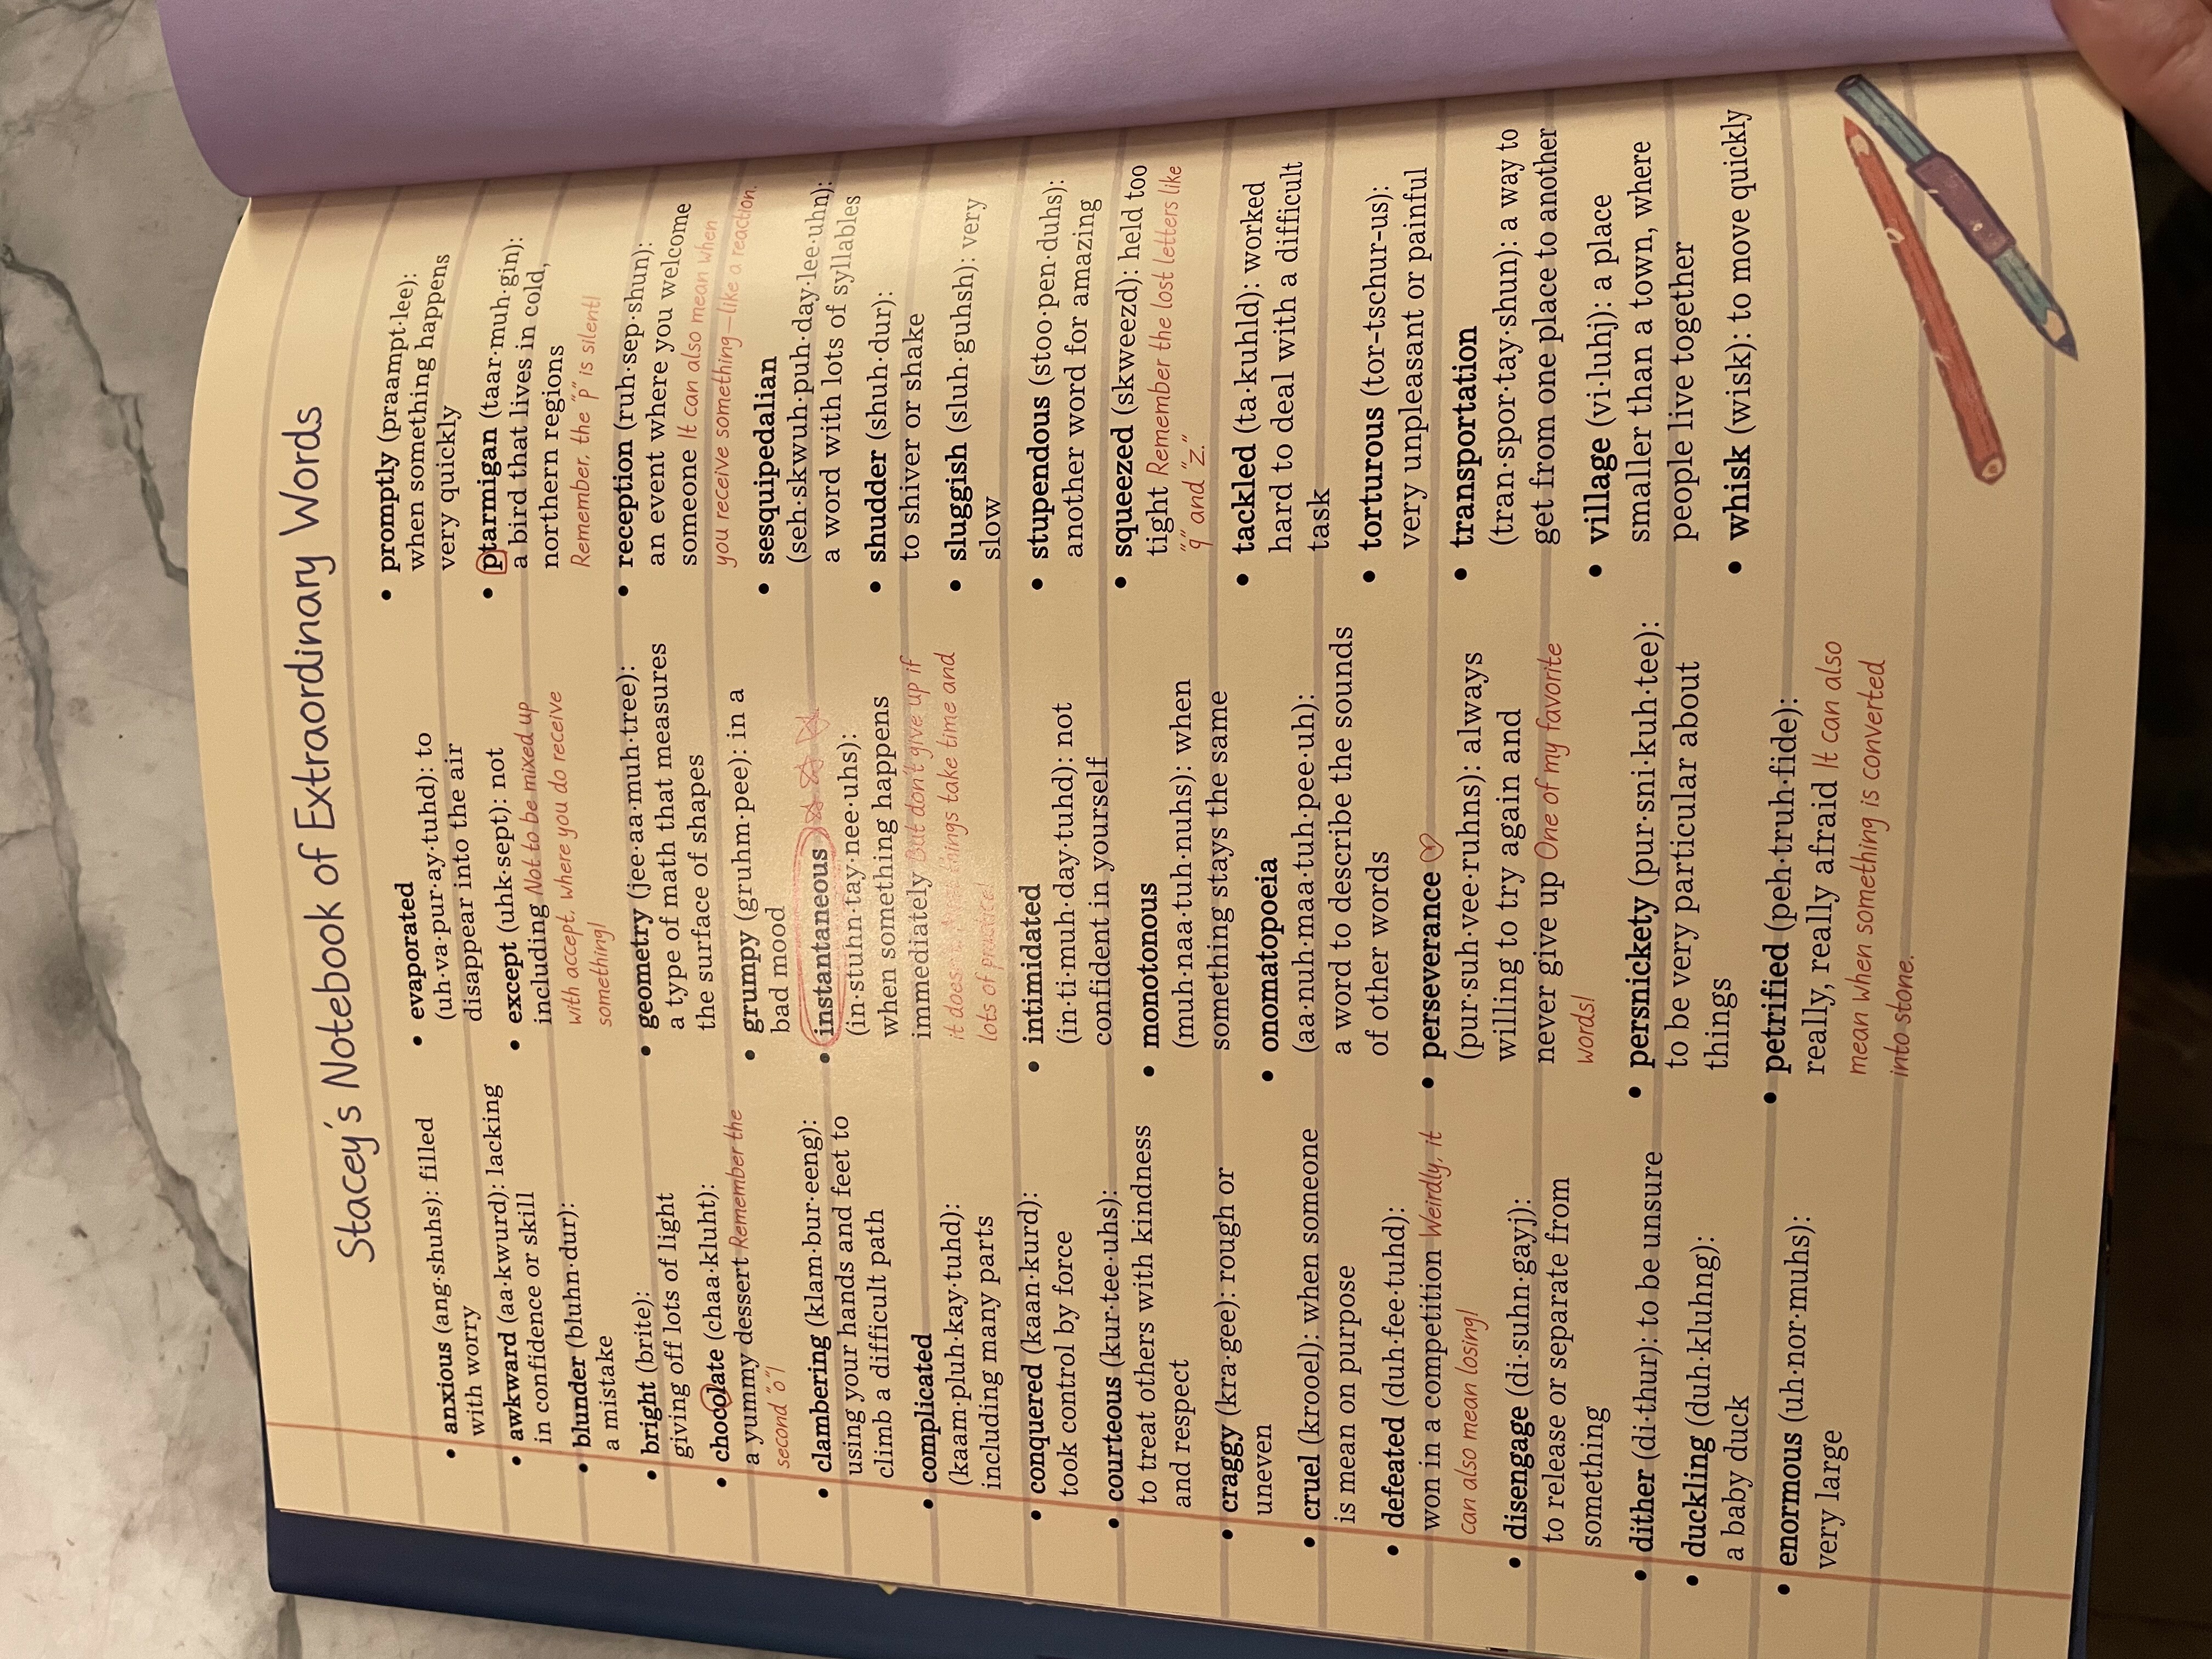 This picture shows a page of Stacey Abramsâ€™ book, Staceyâ€™s Extraordinary Words, where readers can learn some of the extraordinary words the main character Stacey learned. 